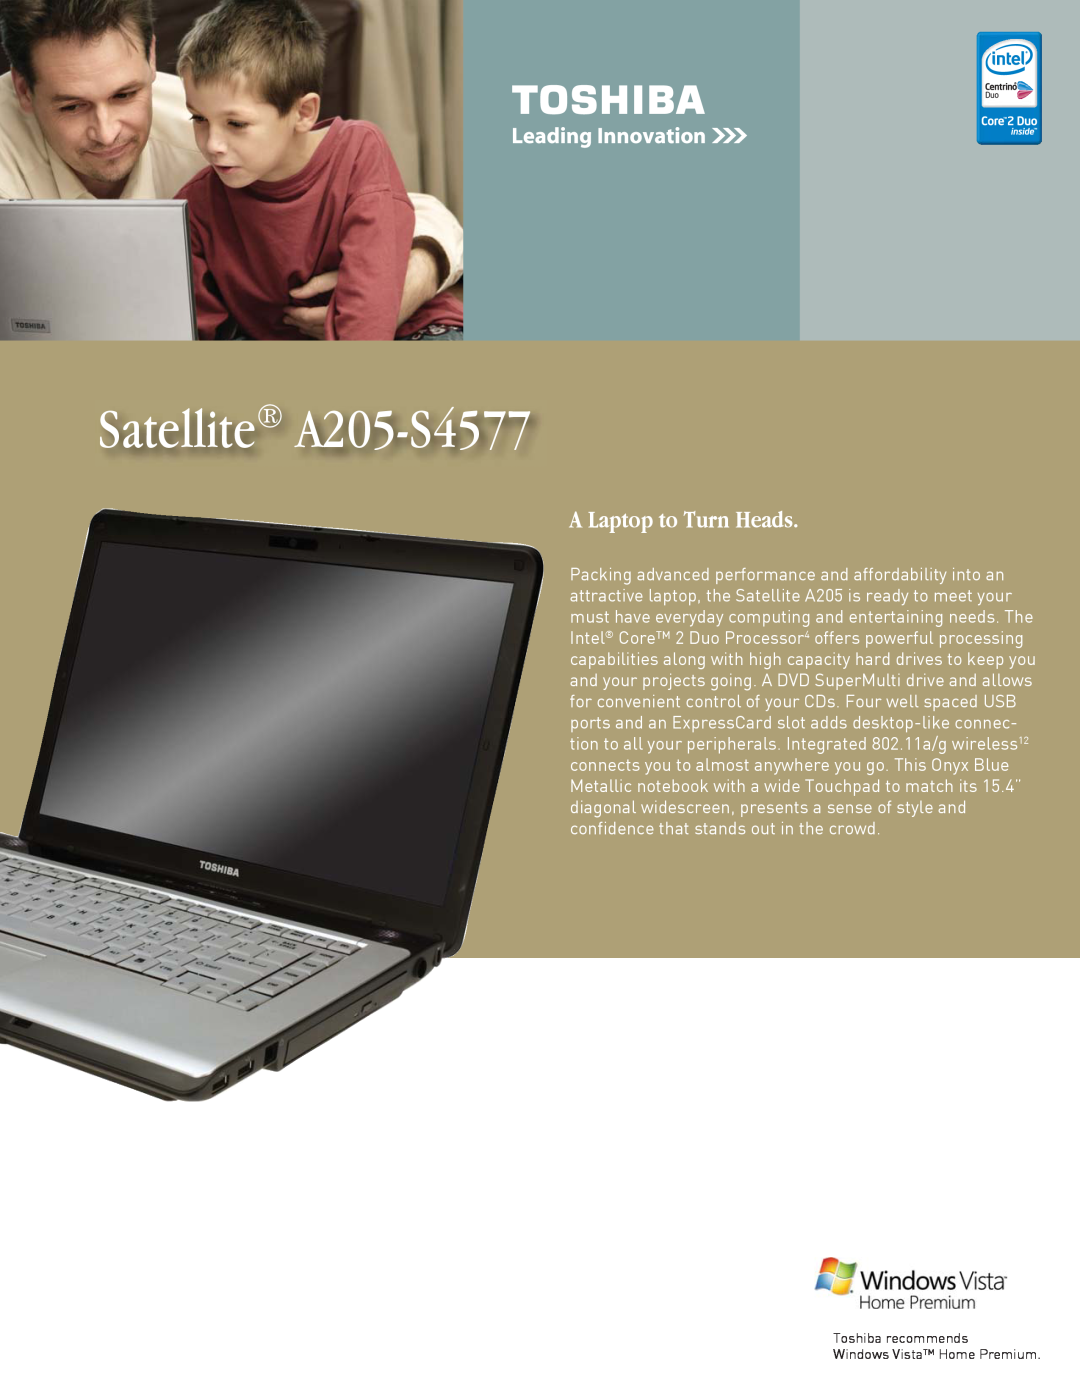 Toshiba manual Satellite A205-S4577, A Laptop to Turn Heads 